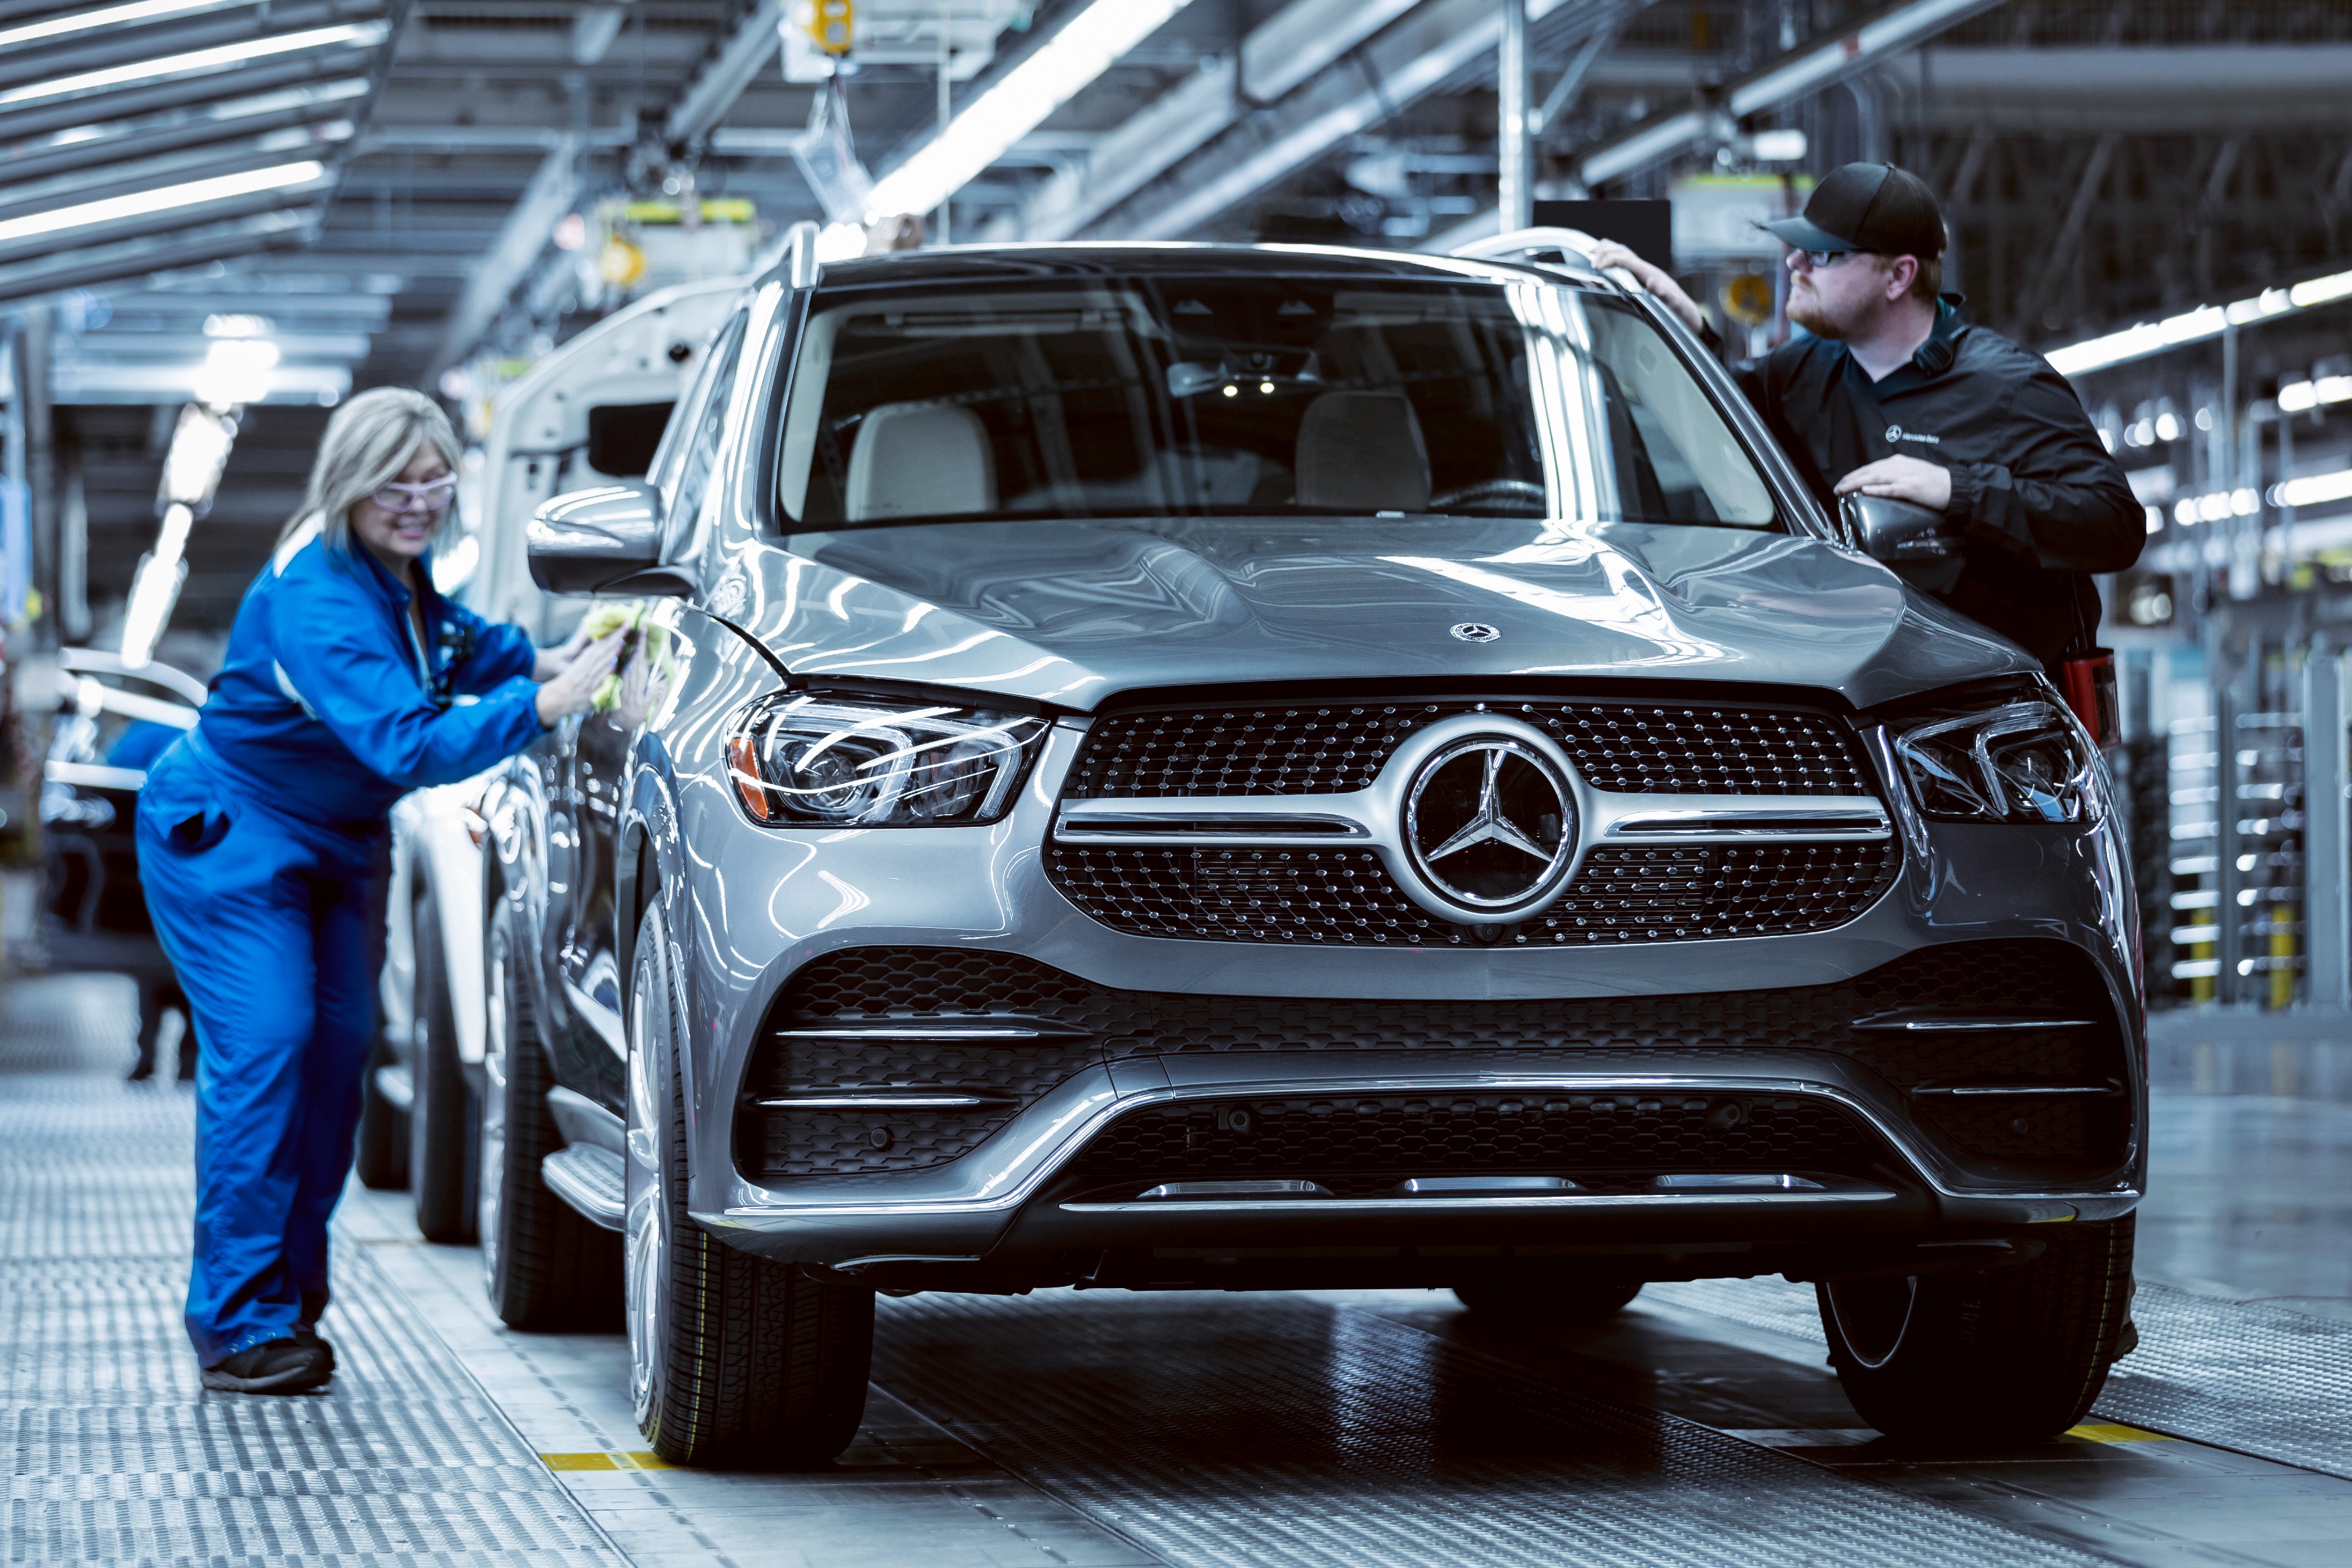 The facelifted Mercedes-Benz GLE will have revised bumpers, grille and headlights, while the cabin will also get new features.